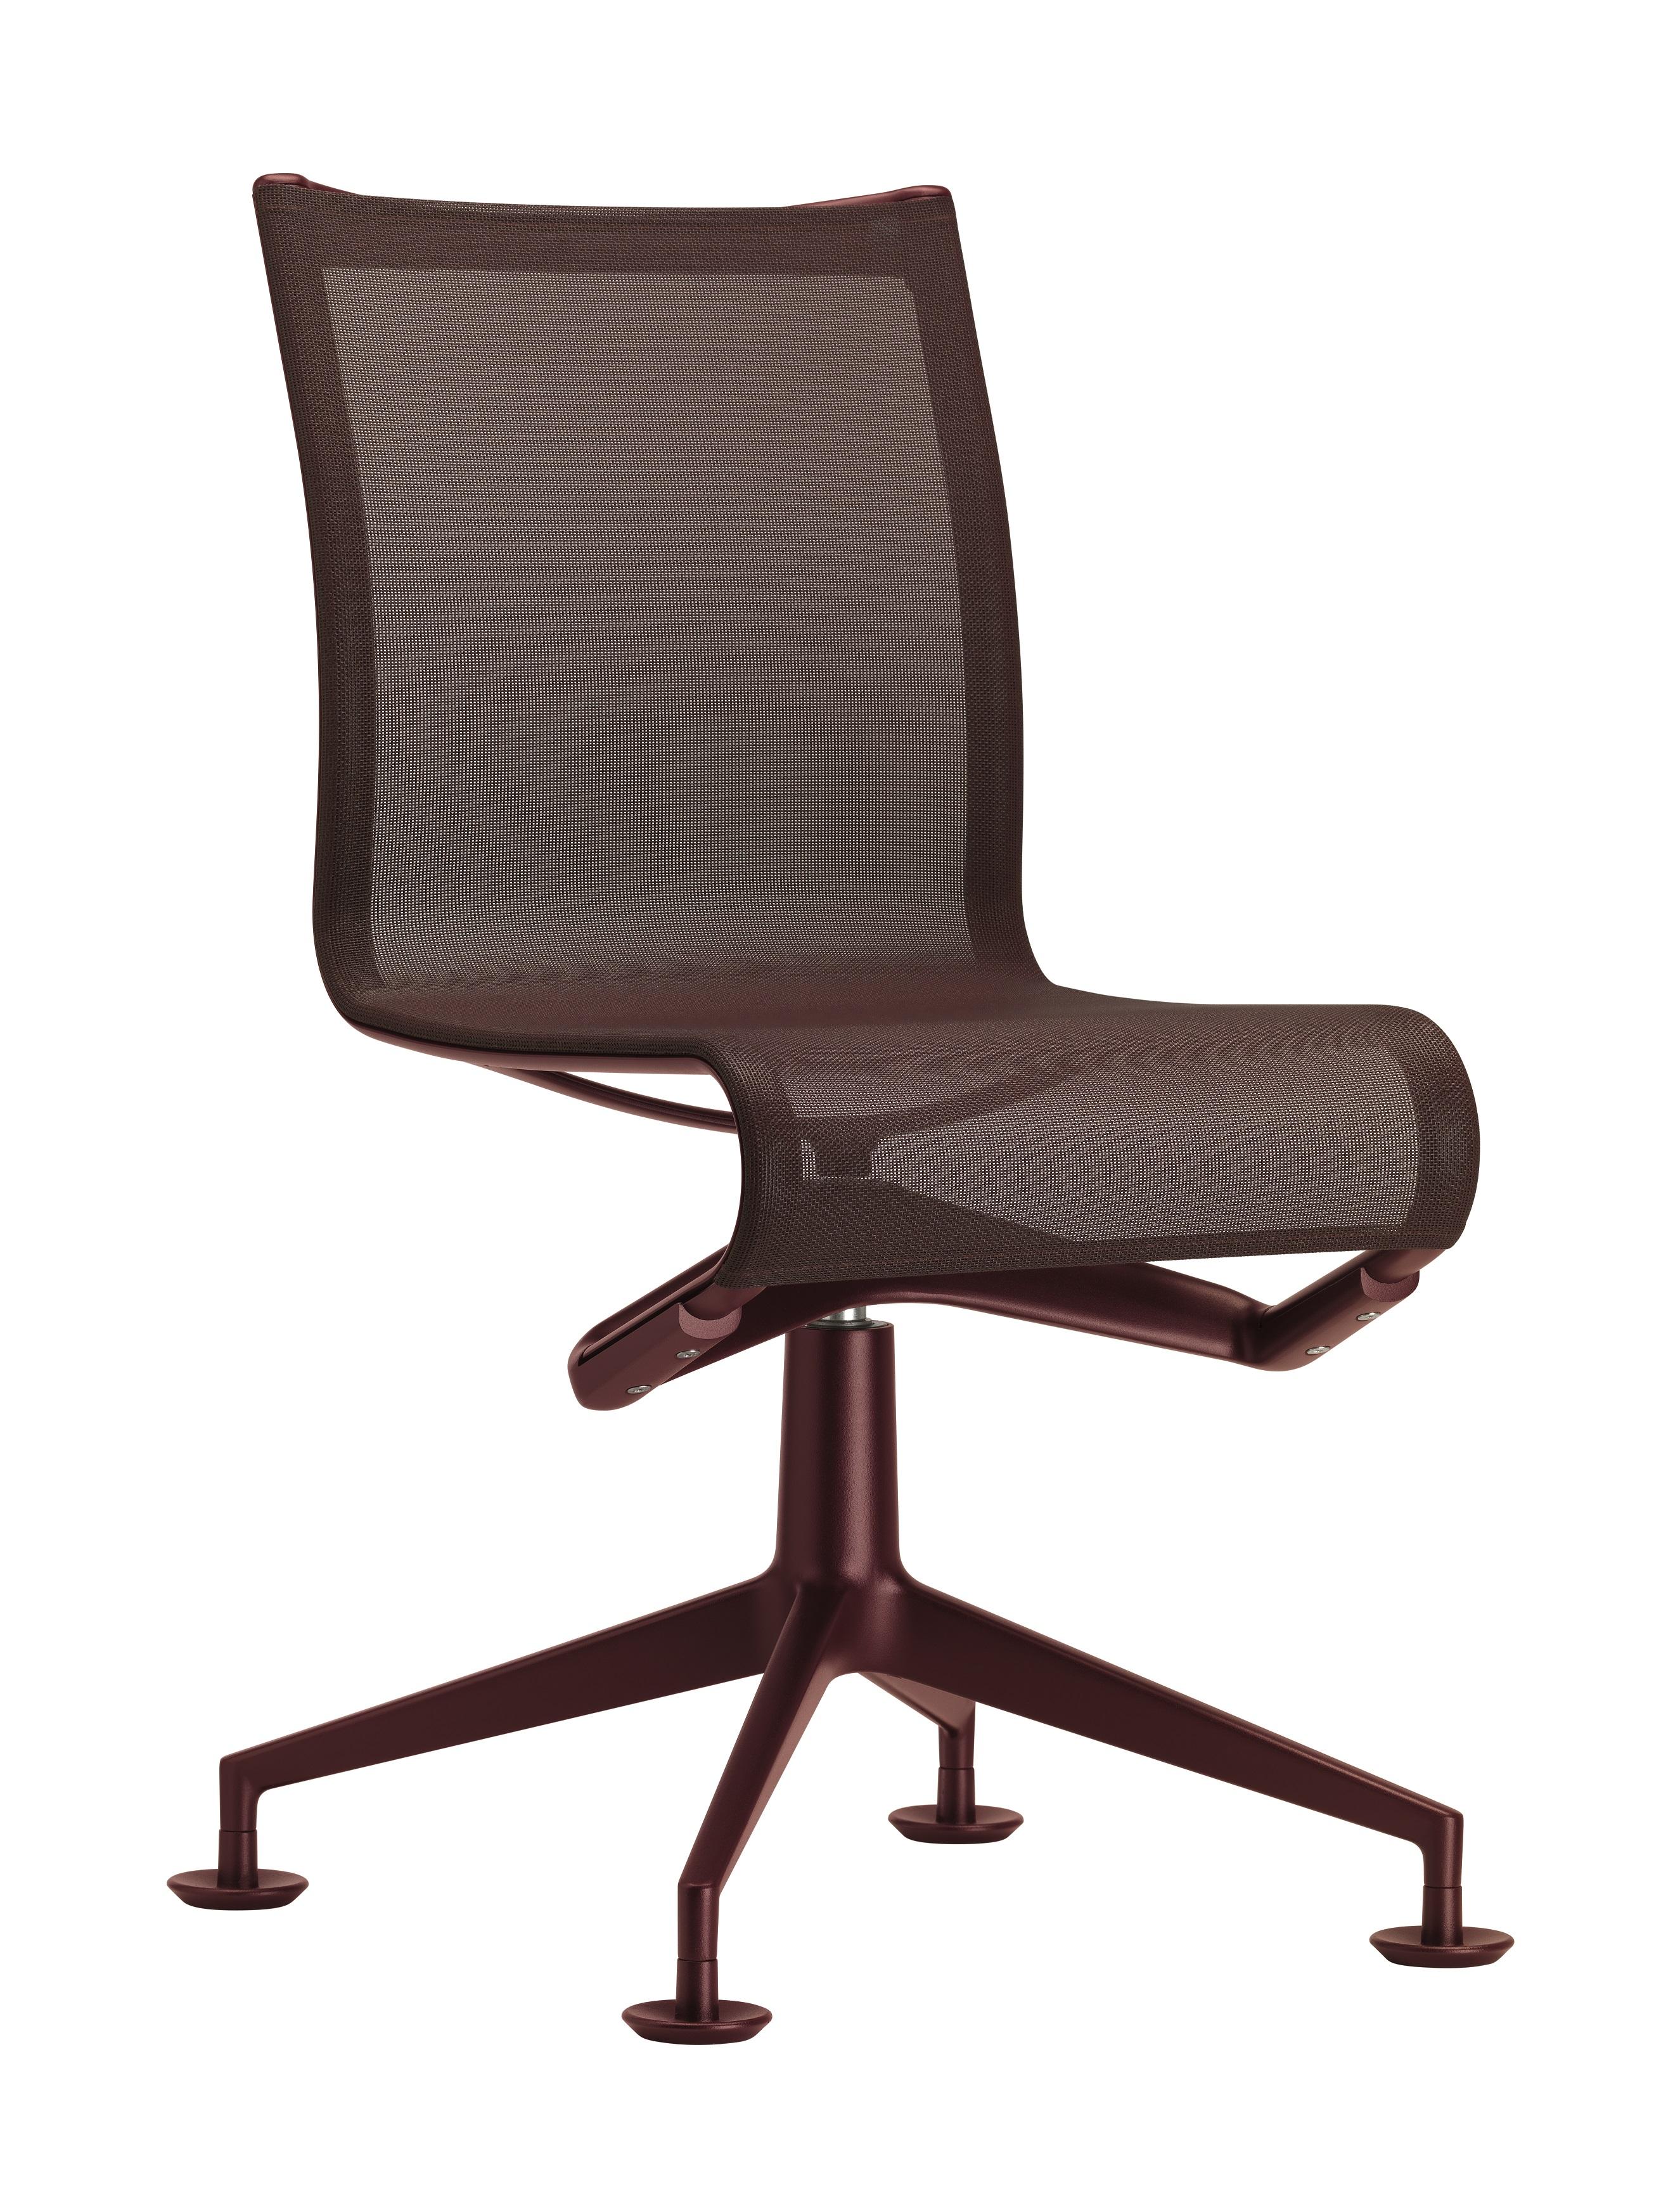 Alias 436 Meetingframe 44 Chair in Aubergine Seat with Lacquered Aluminum Frame In New Condition For Sale In Brooklyn, NY